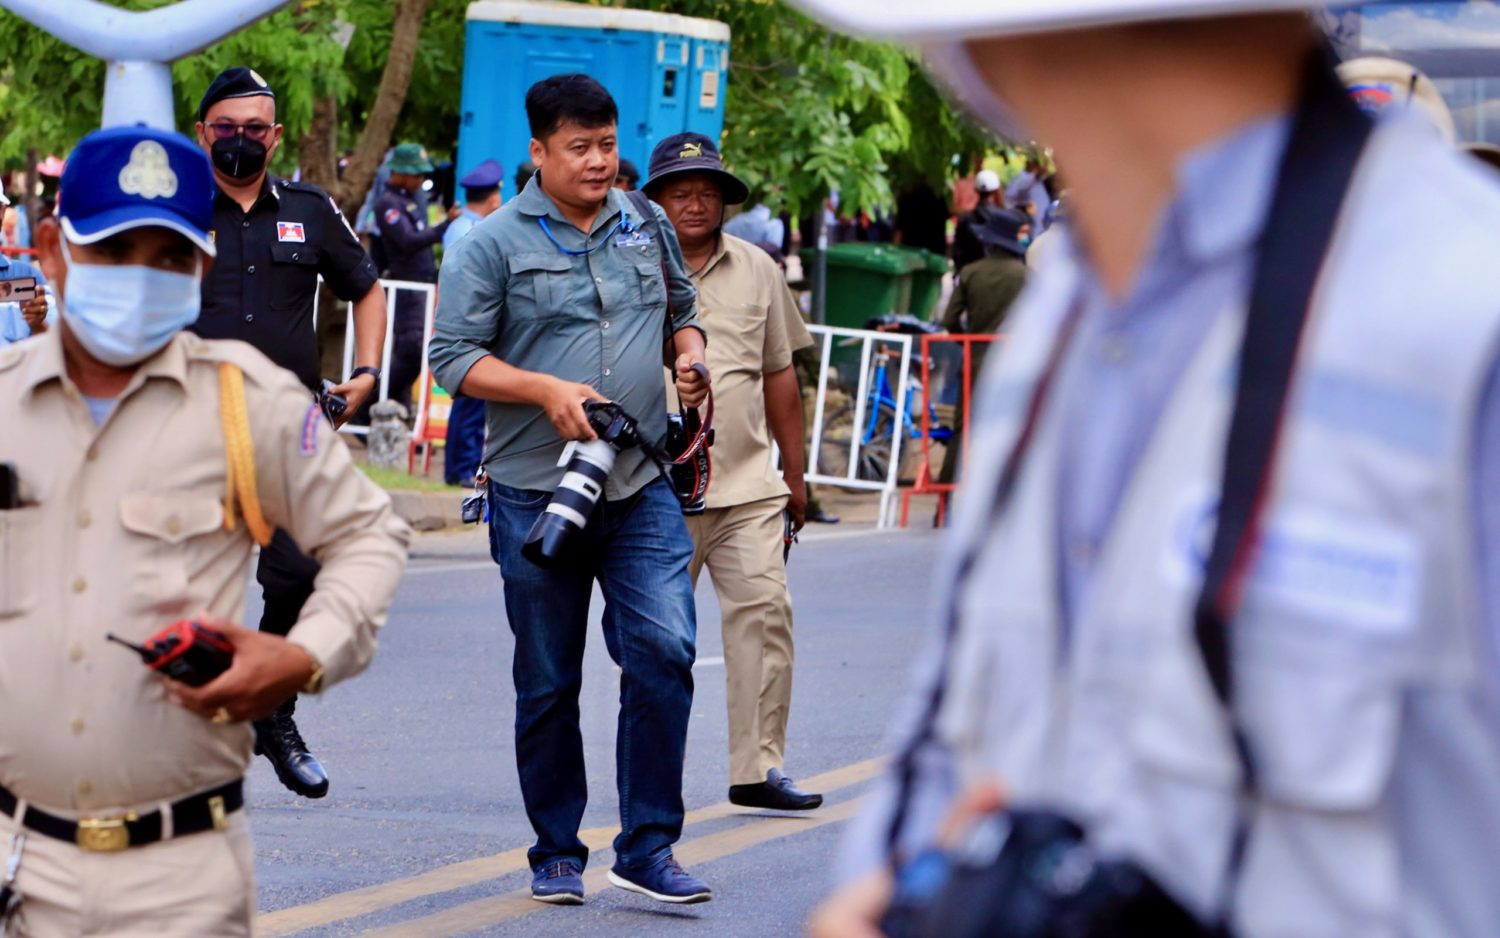 Local officials push back a photojournalist at the NagaWorld protest in Phnom Penh on June 27, 2022. (Hean Rangsey/VOD)